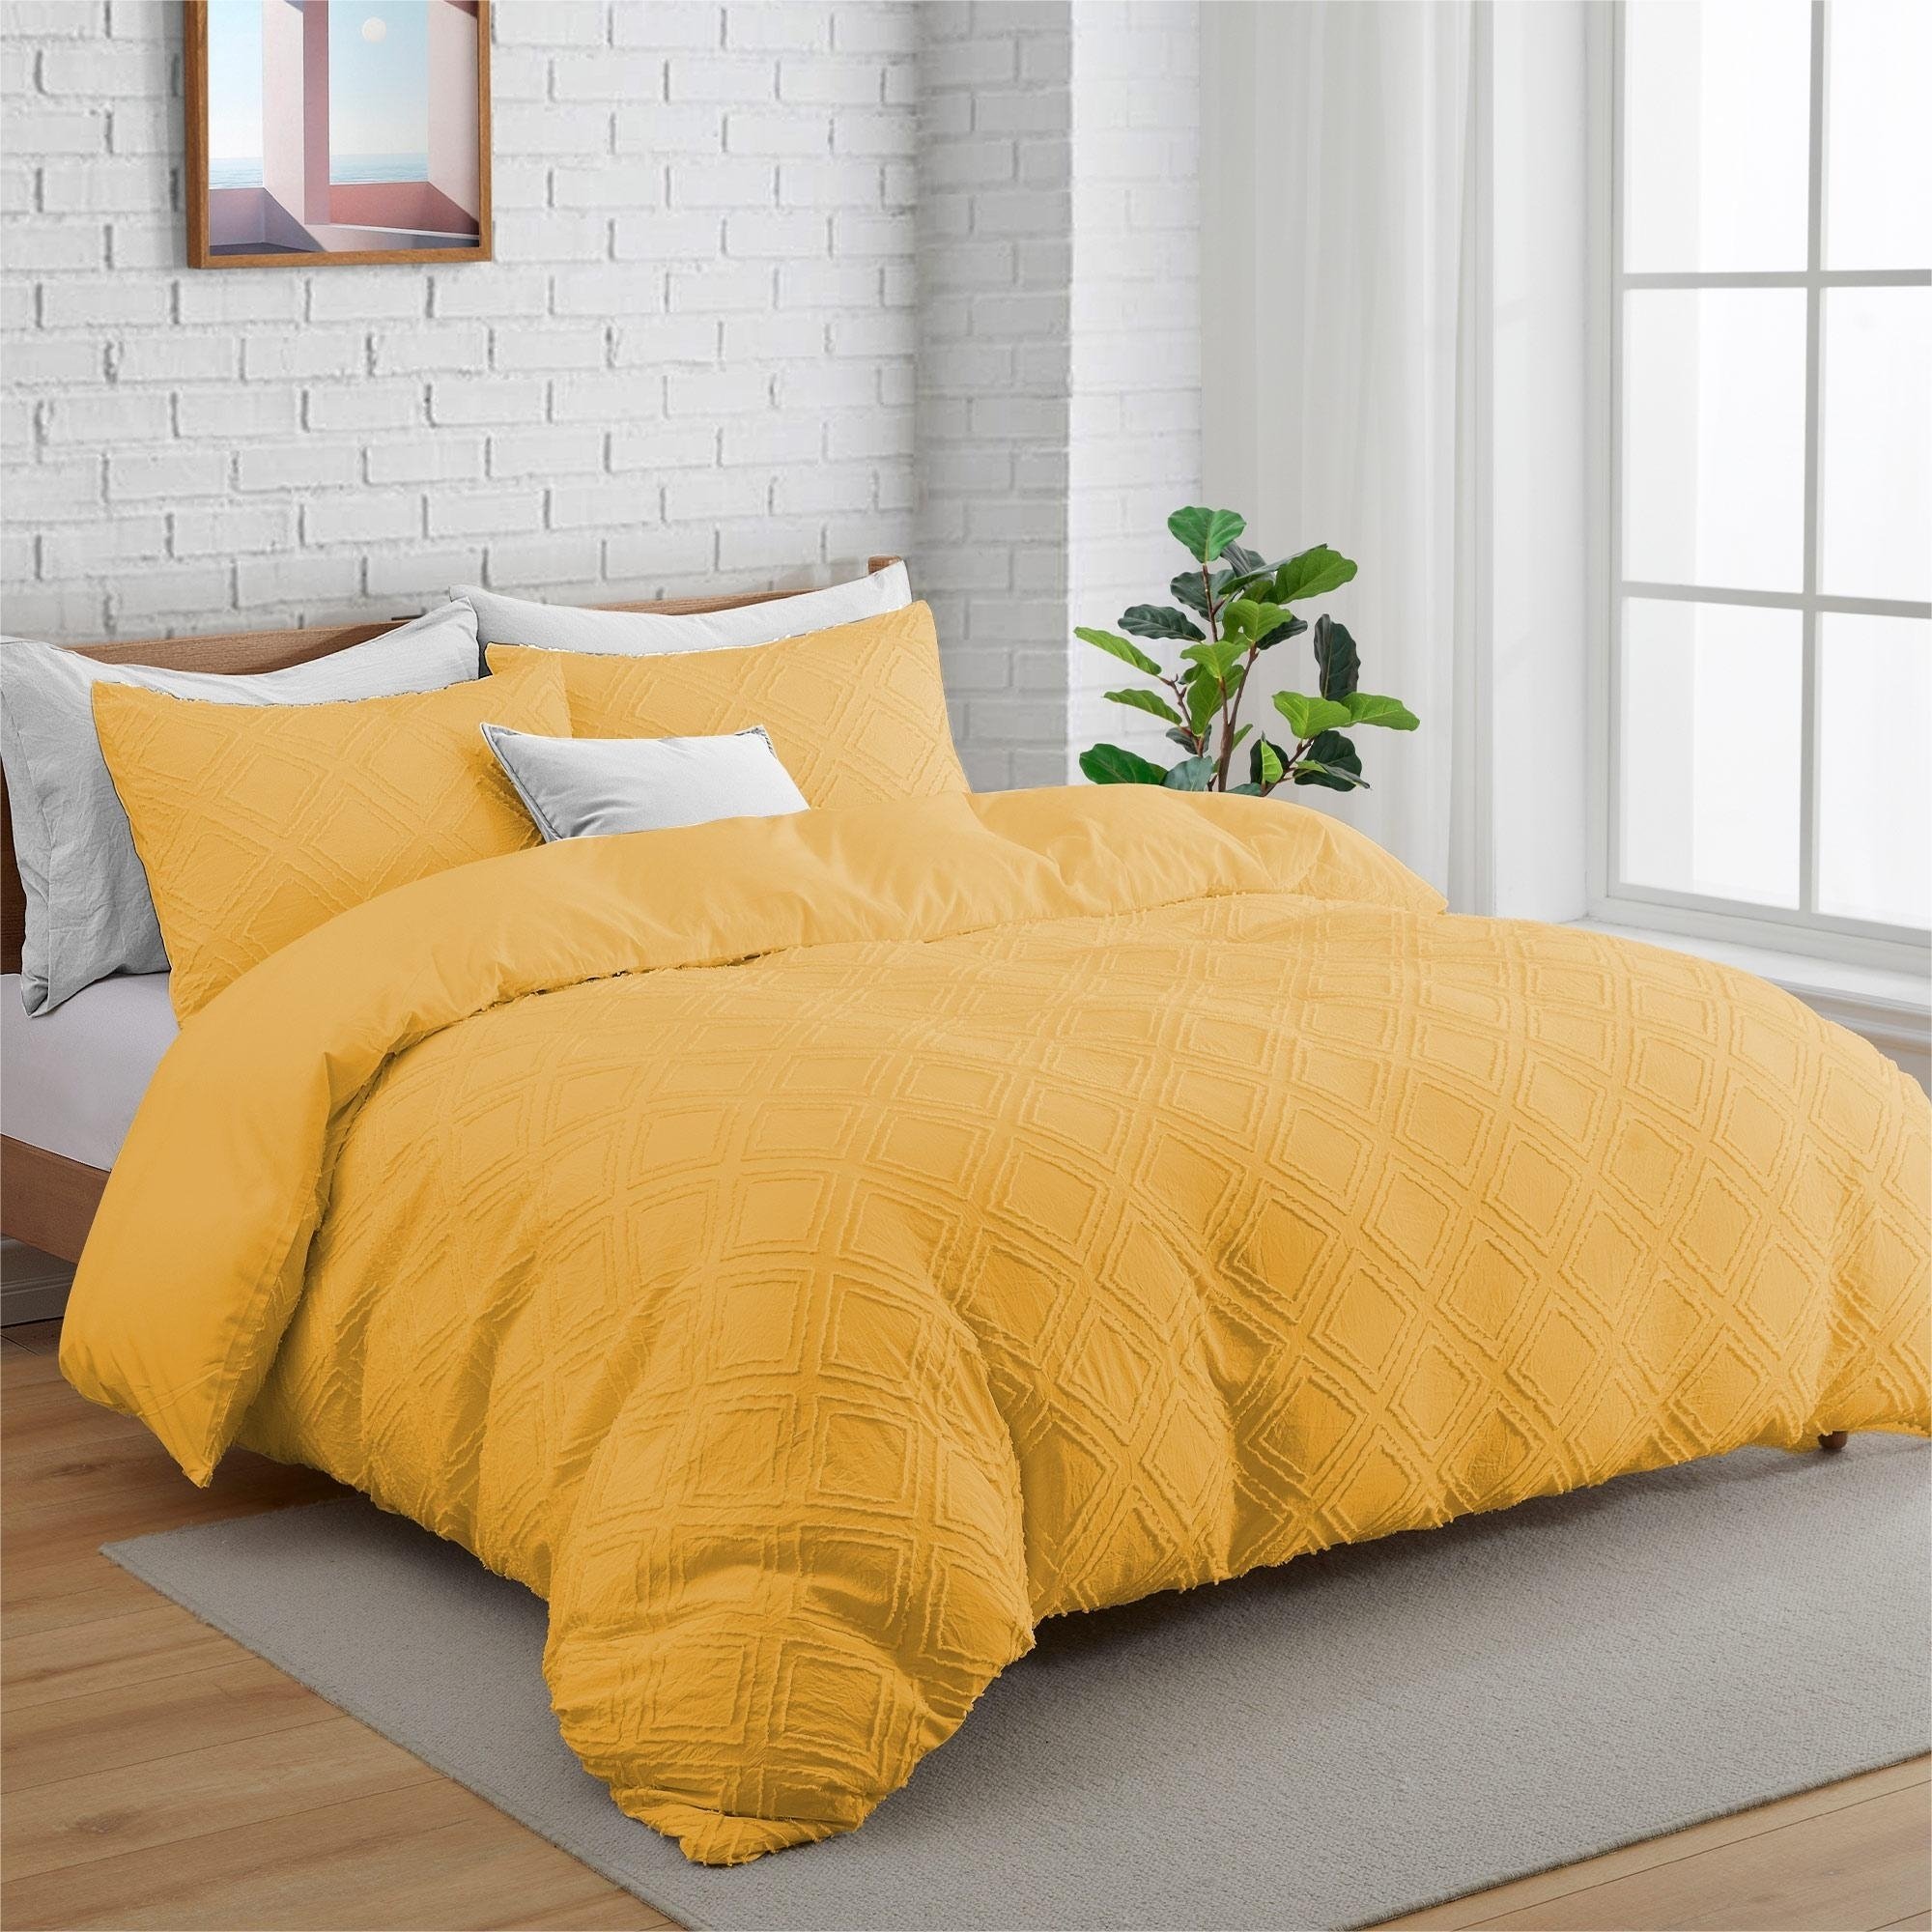 Clipped Jacquard Duvet Cover Set With Shams - Yellow/Square, Full/Queen